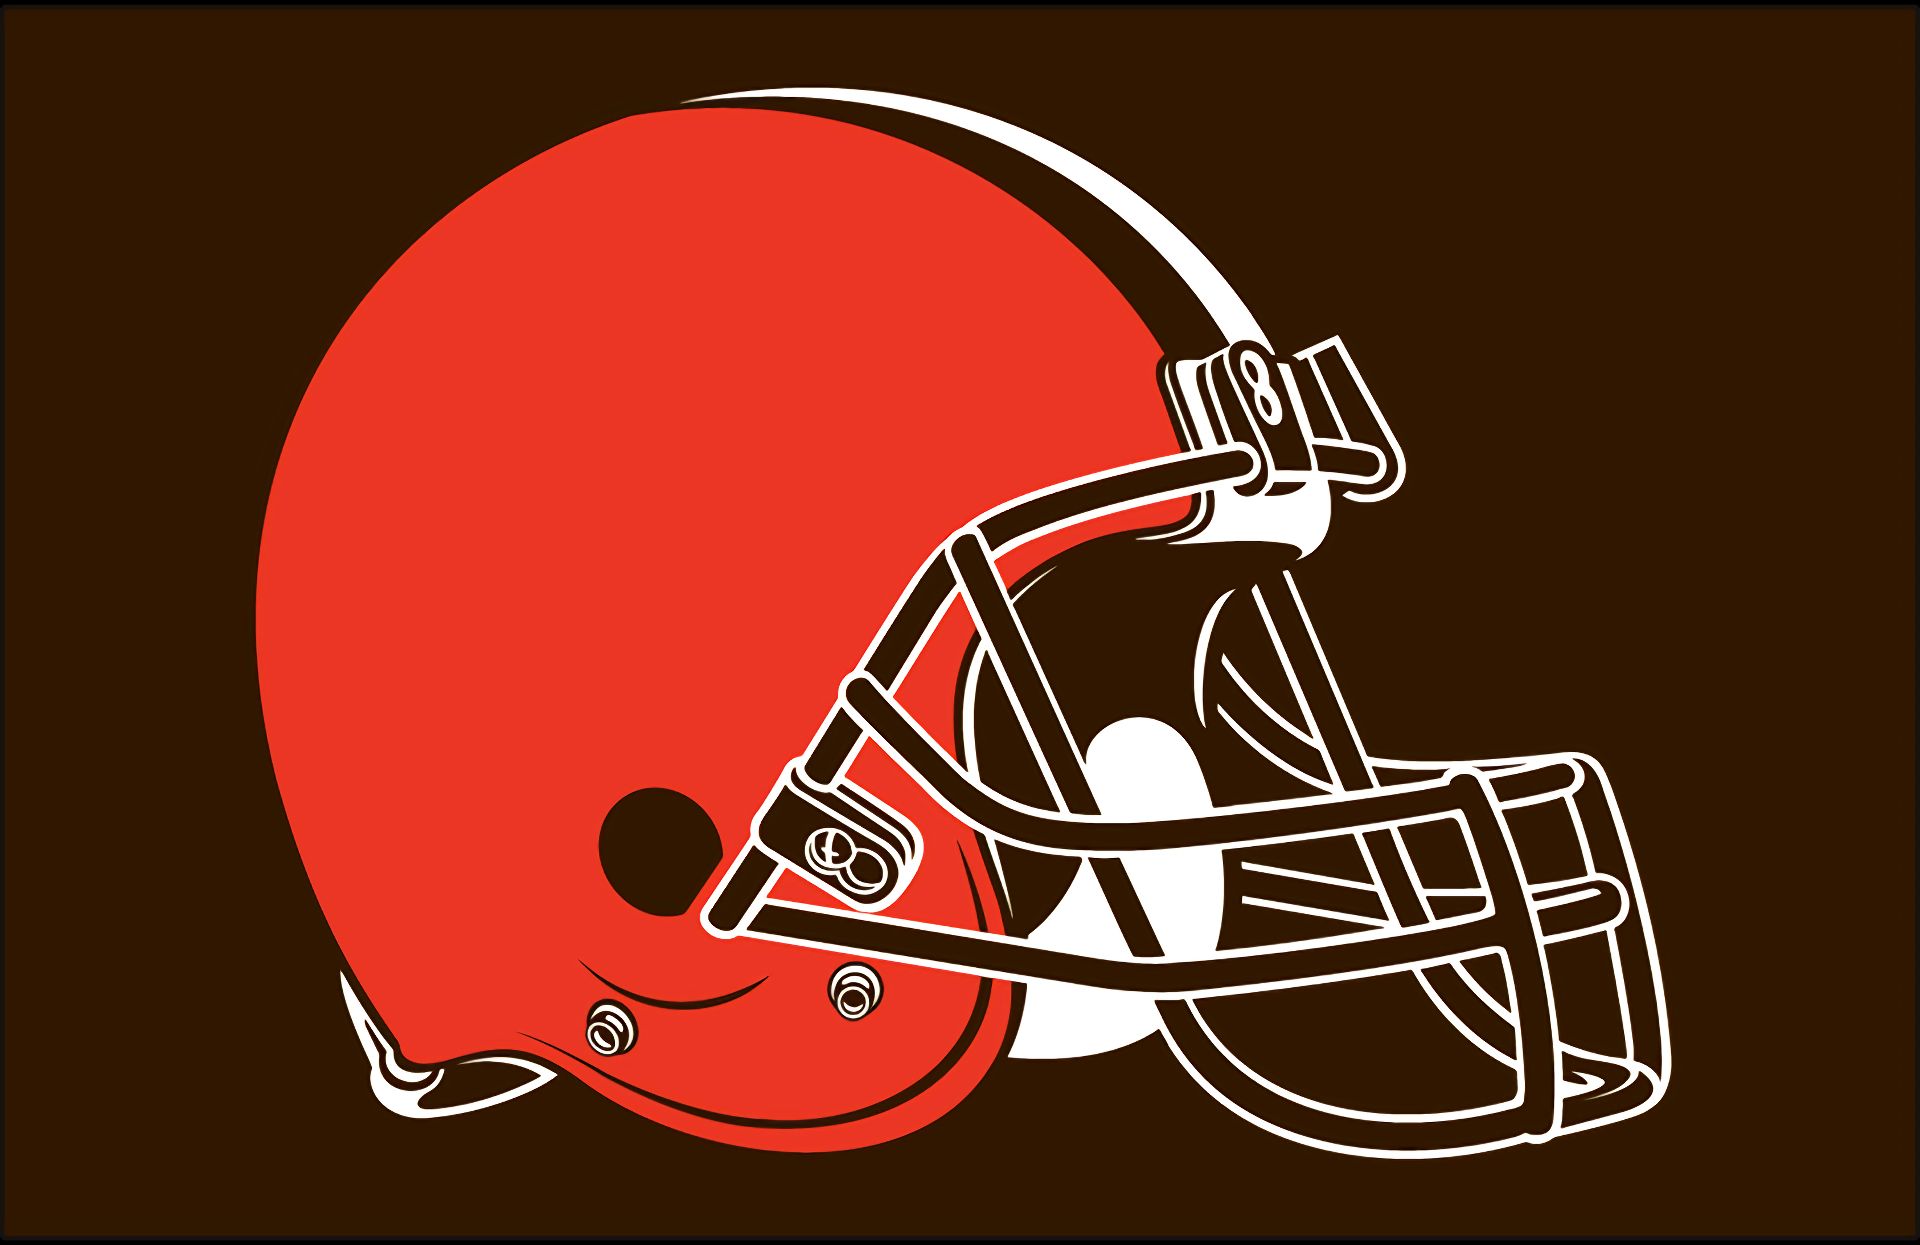 Cleveland Browns iPhone Wallpapers  iPHONE XXSXR also wo  Flickr